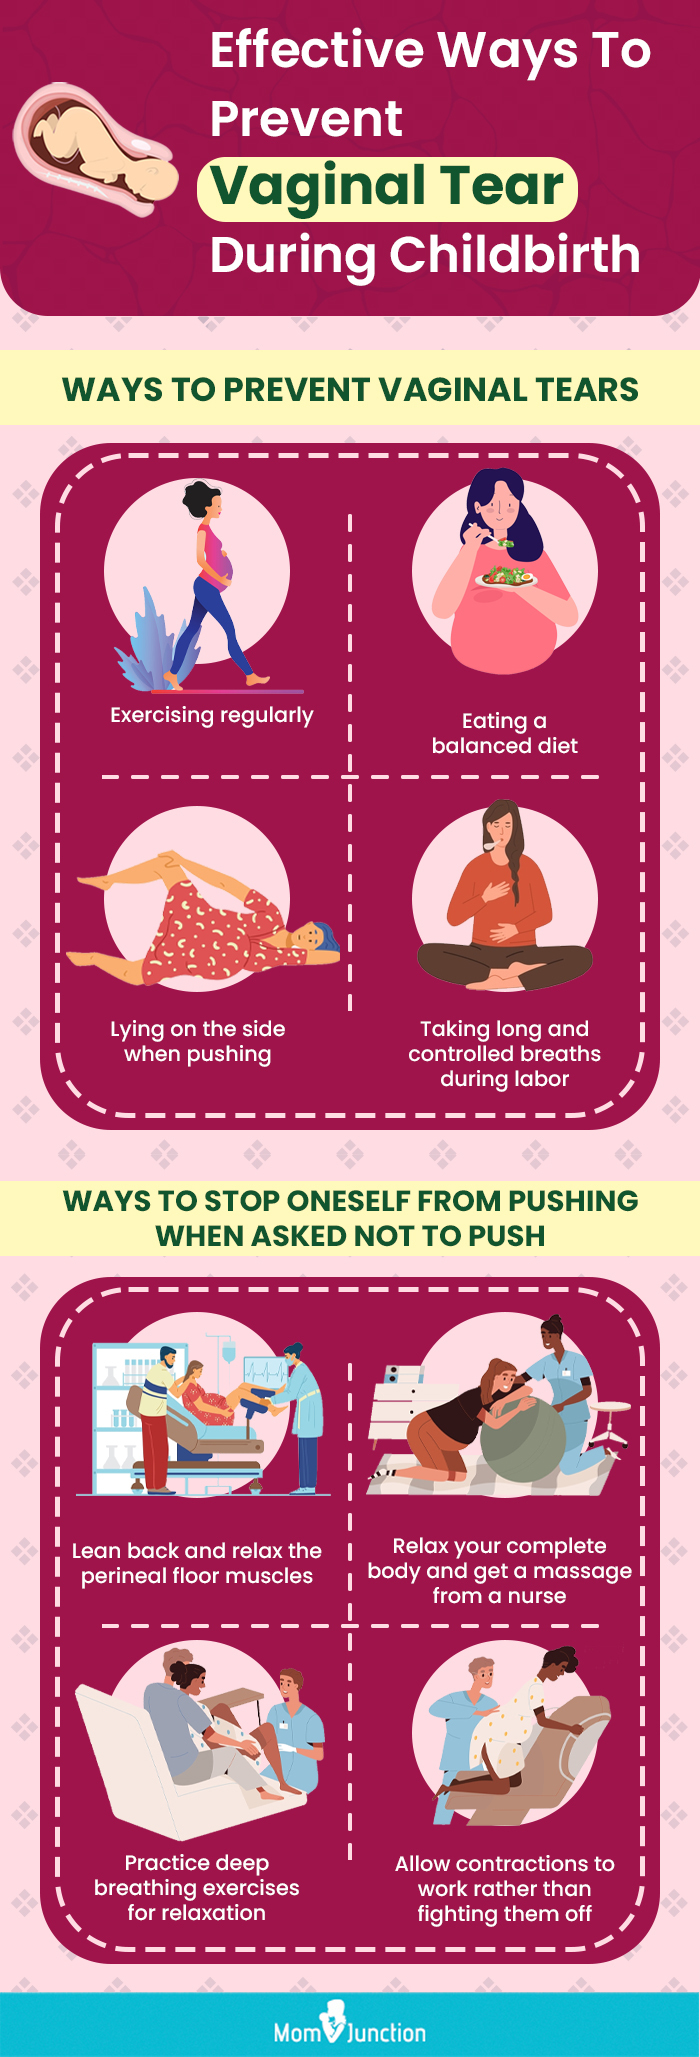 effective ways to prevent vaginal tear during childbirth (infographic)